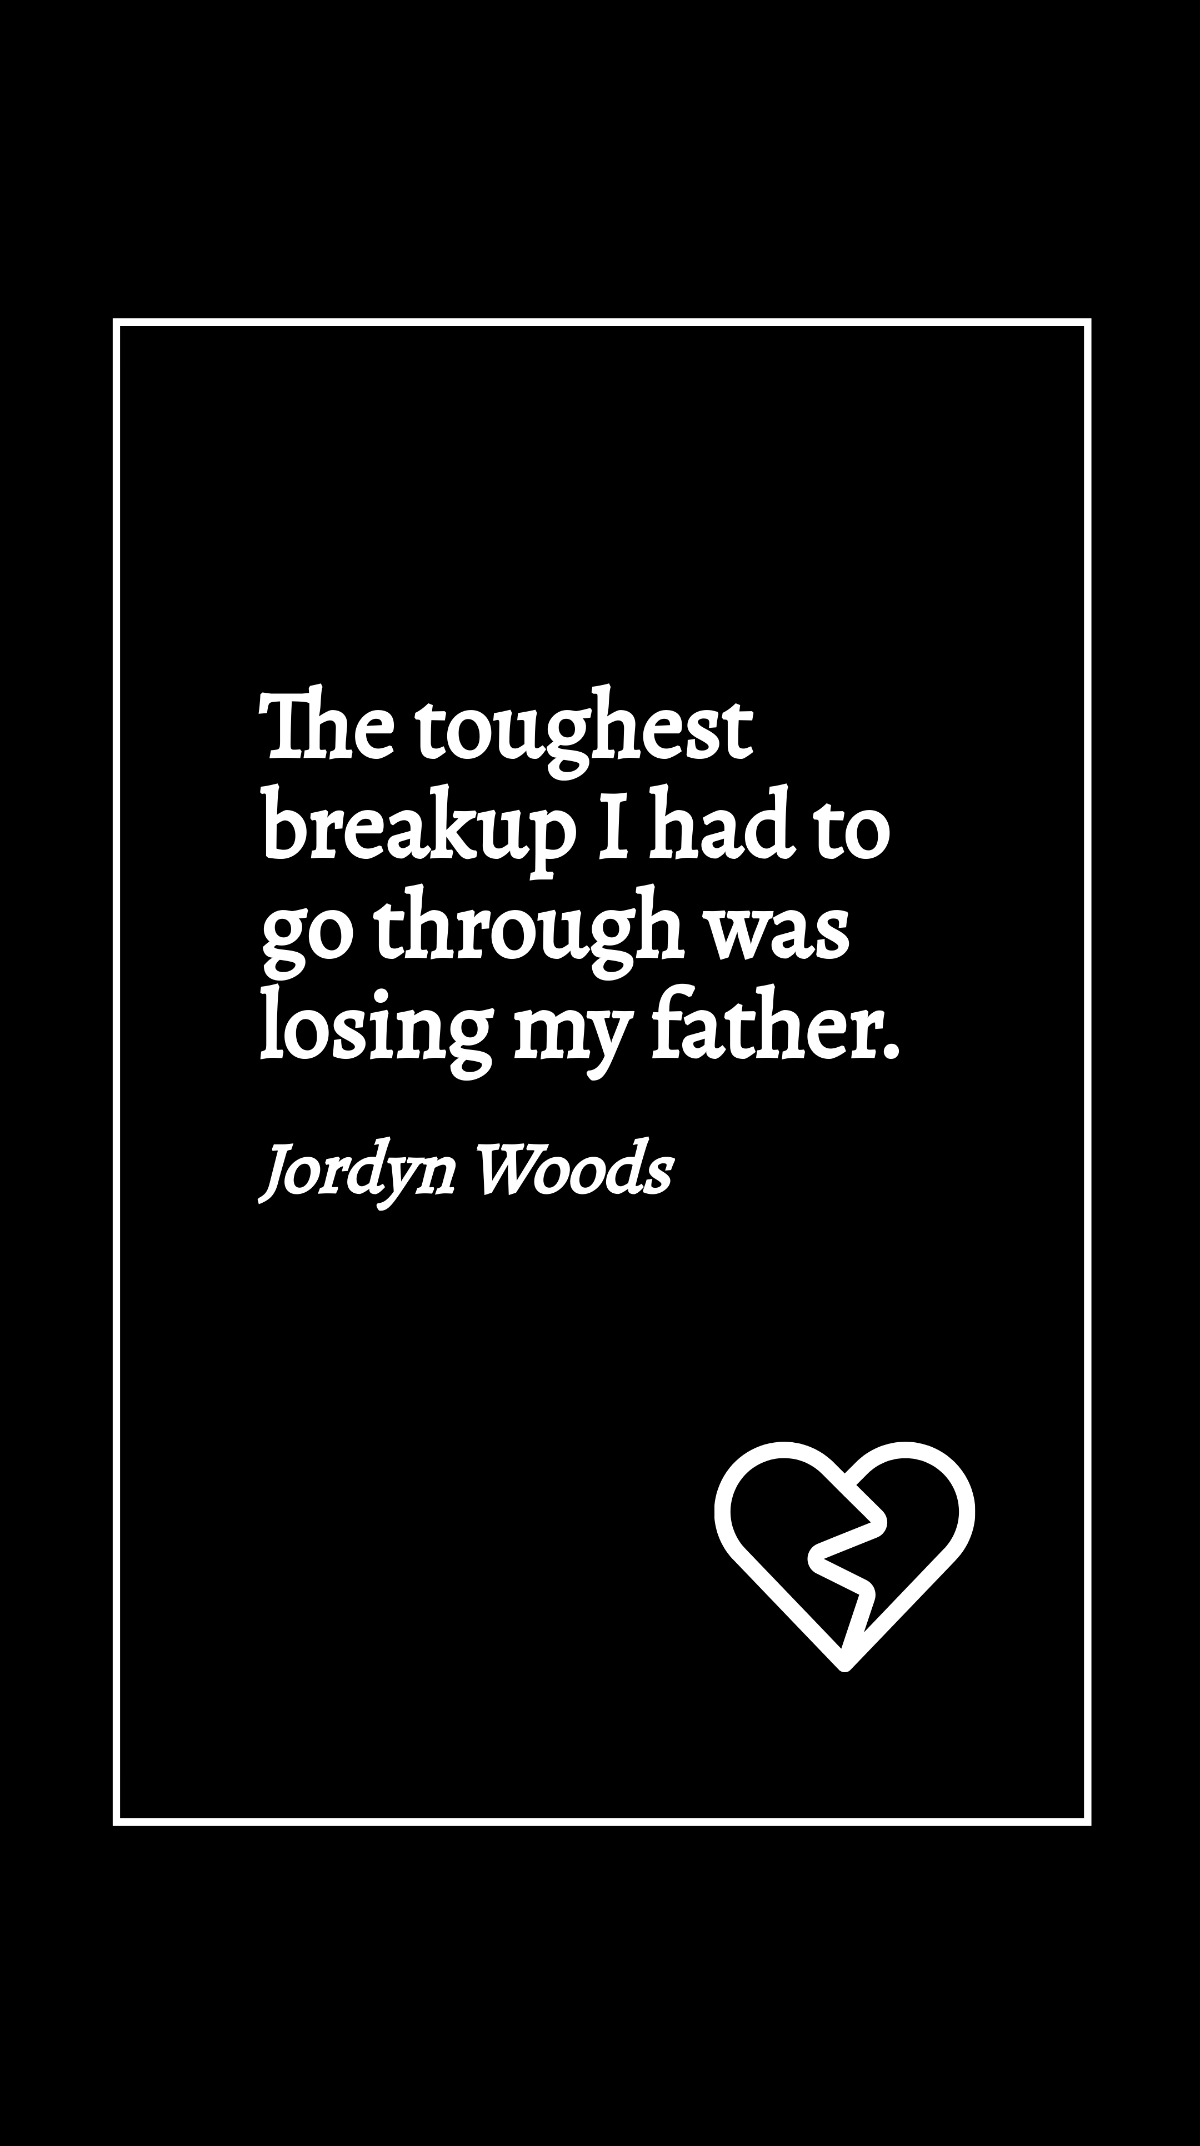 Free Jordyn Woods - The toughest breakup I had to go through was losing my father. Template